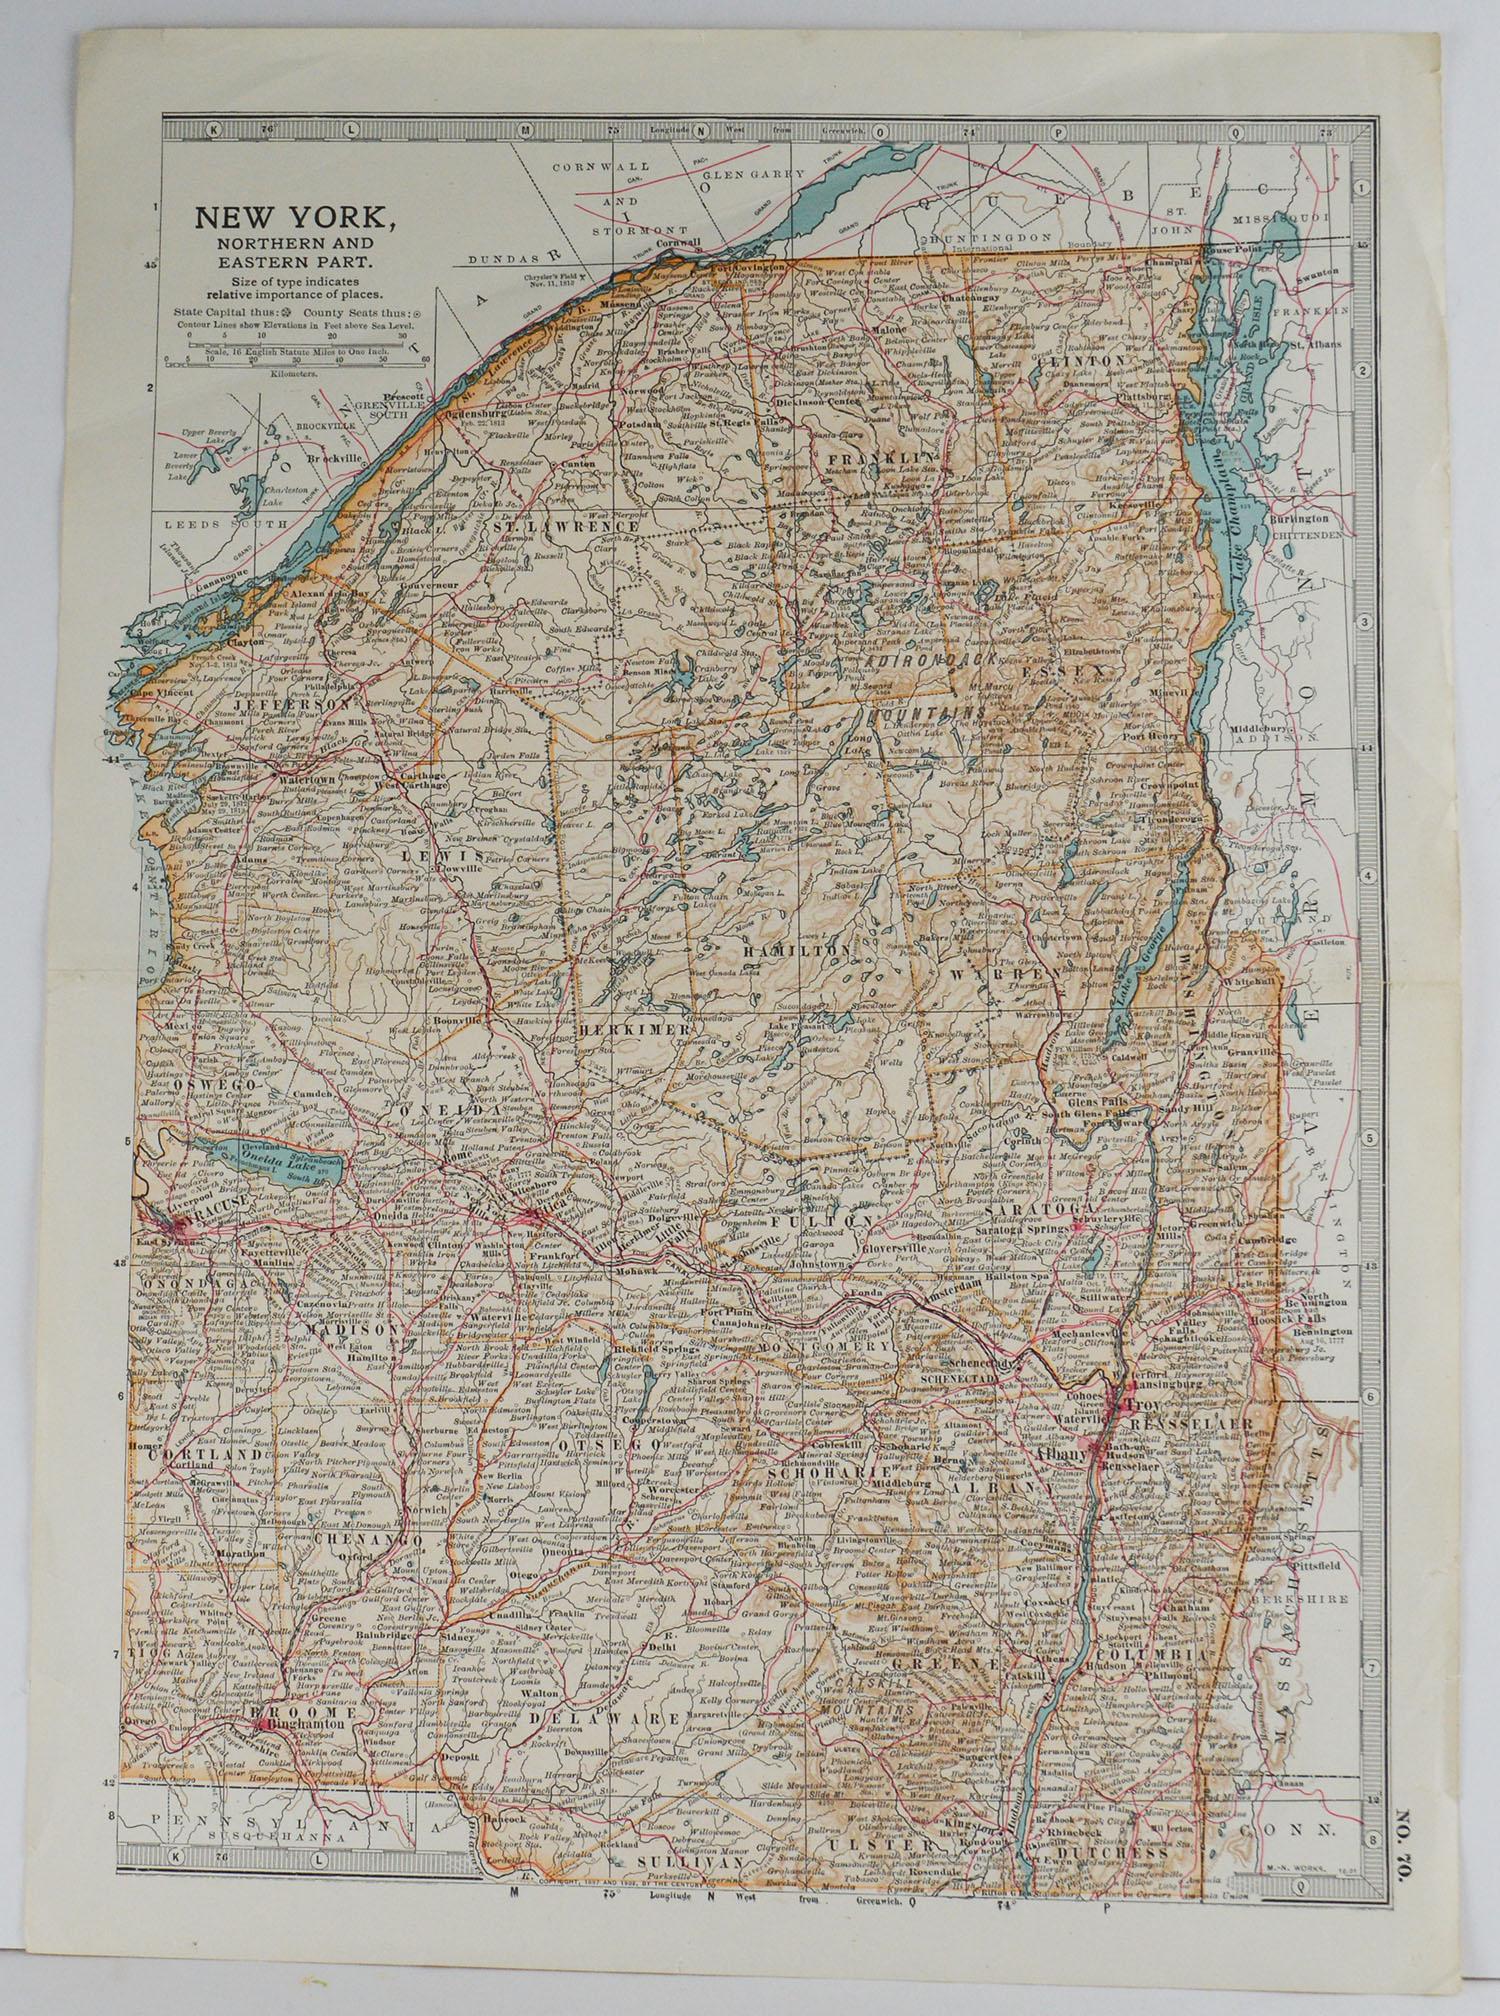 Great map of Upstate New York

Original color.

Published circa 1890

Repairs to minor edge tears. Crease in top half.

Unframed.
  